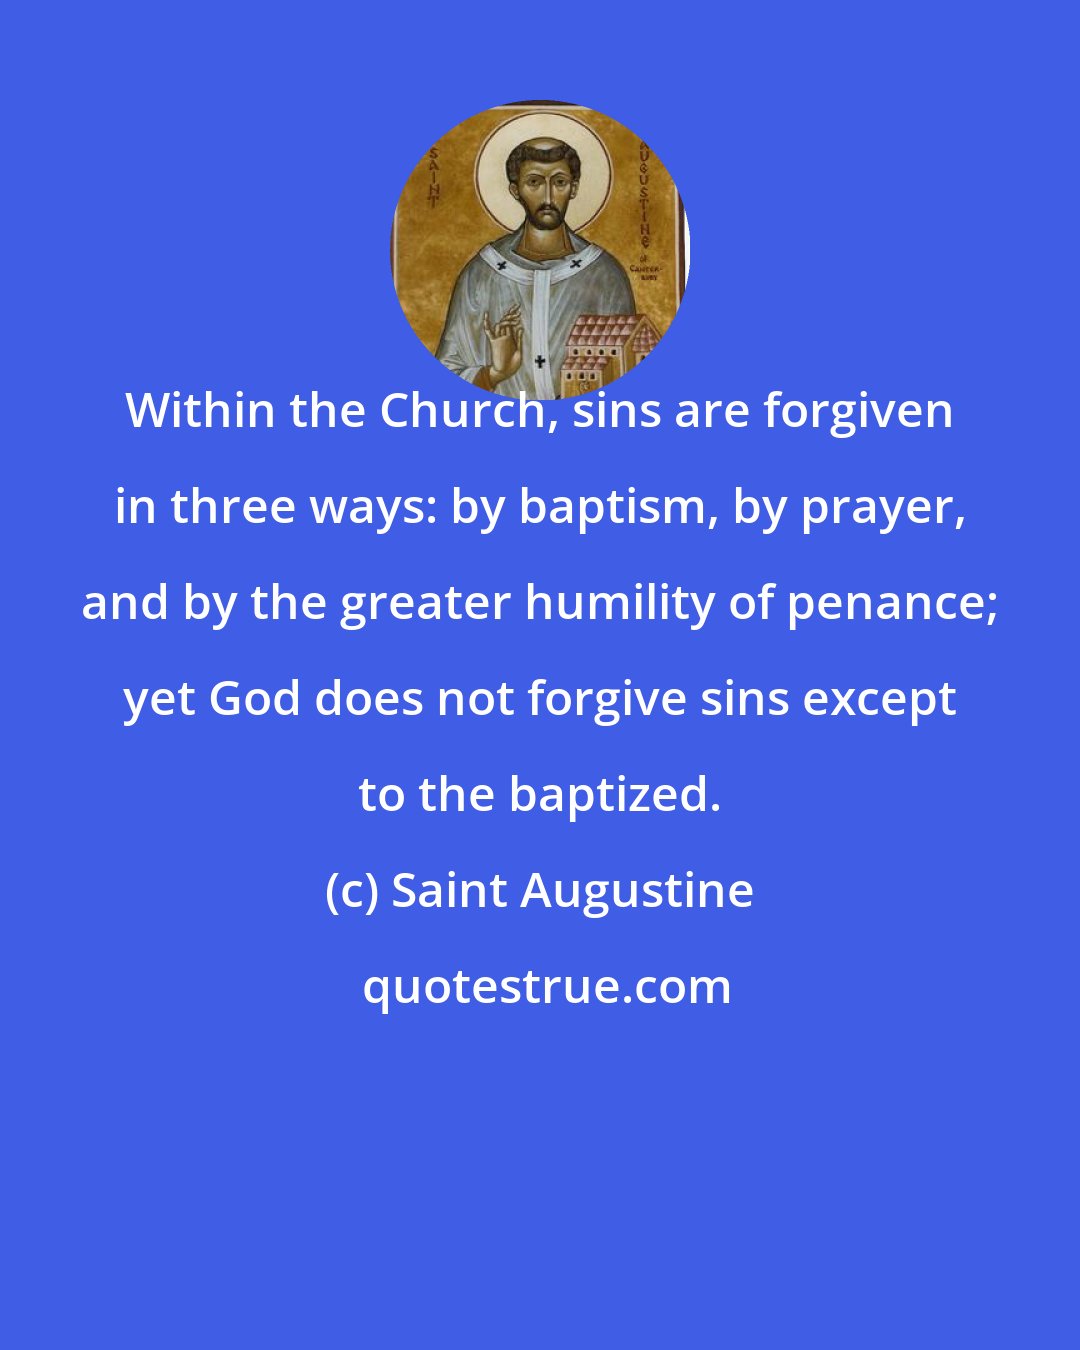 Saint Augustine: Within the Church, sins are forgiven in three ways: by baptism, by prayer, and by the greater humility of penance; yet God does not forgive sins except to the baptized.